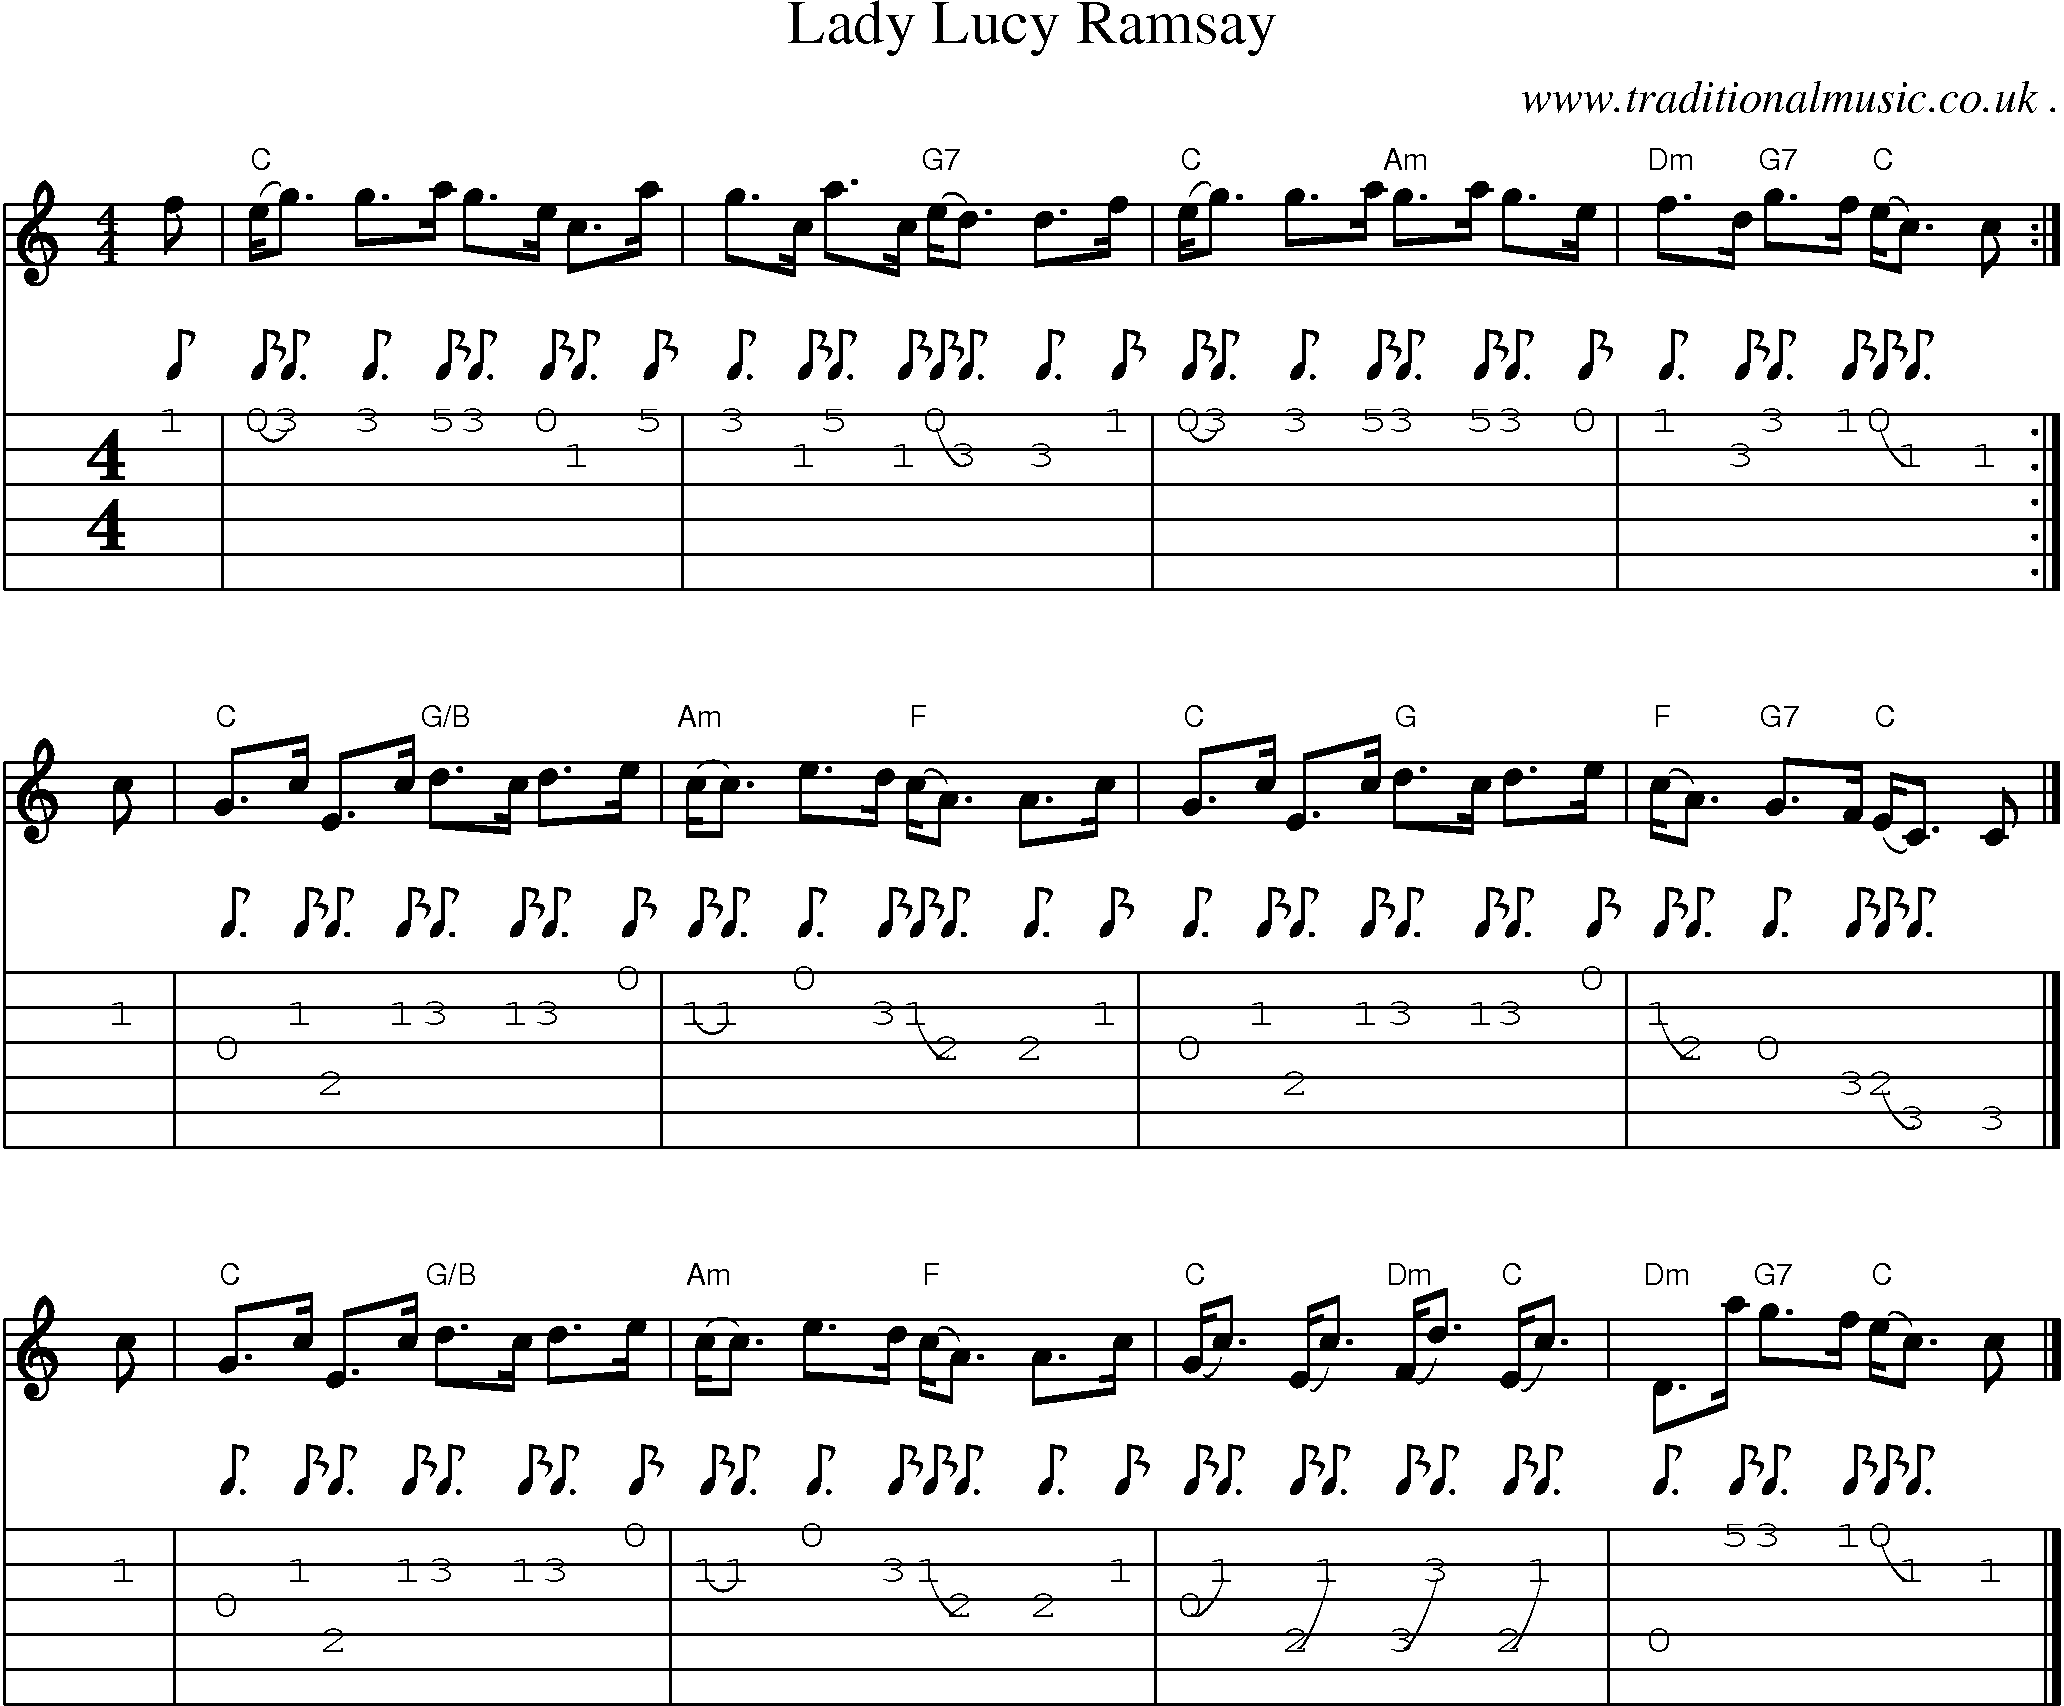 Sheet-music  score, Chords and Guitar Tabs for Lady Lucy Ramsay